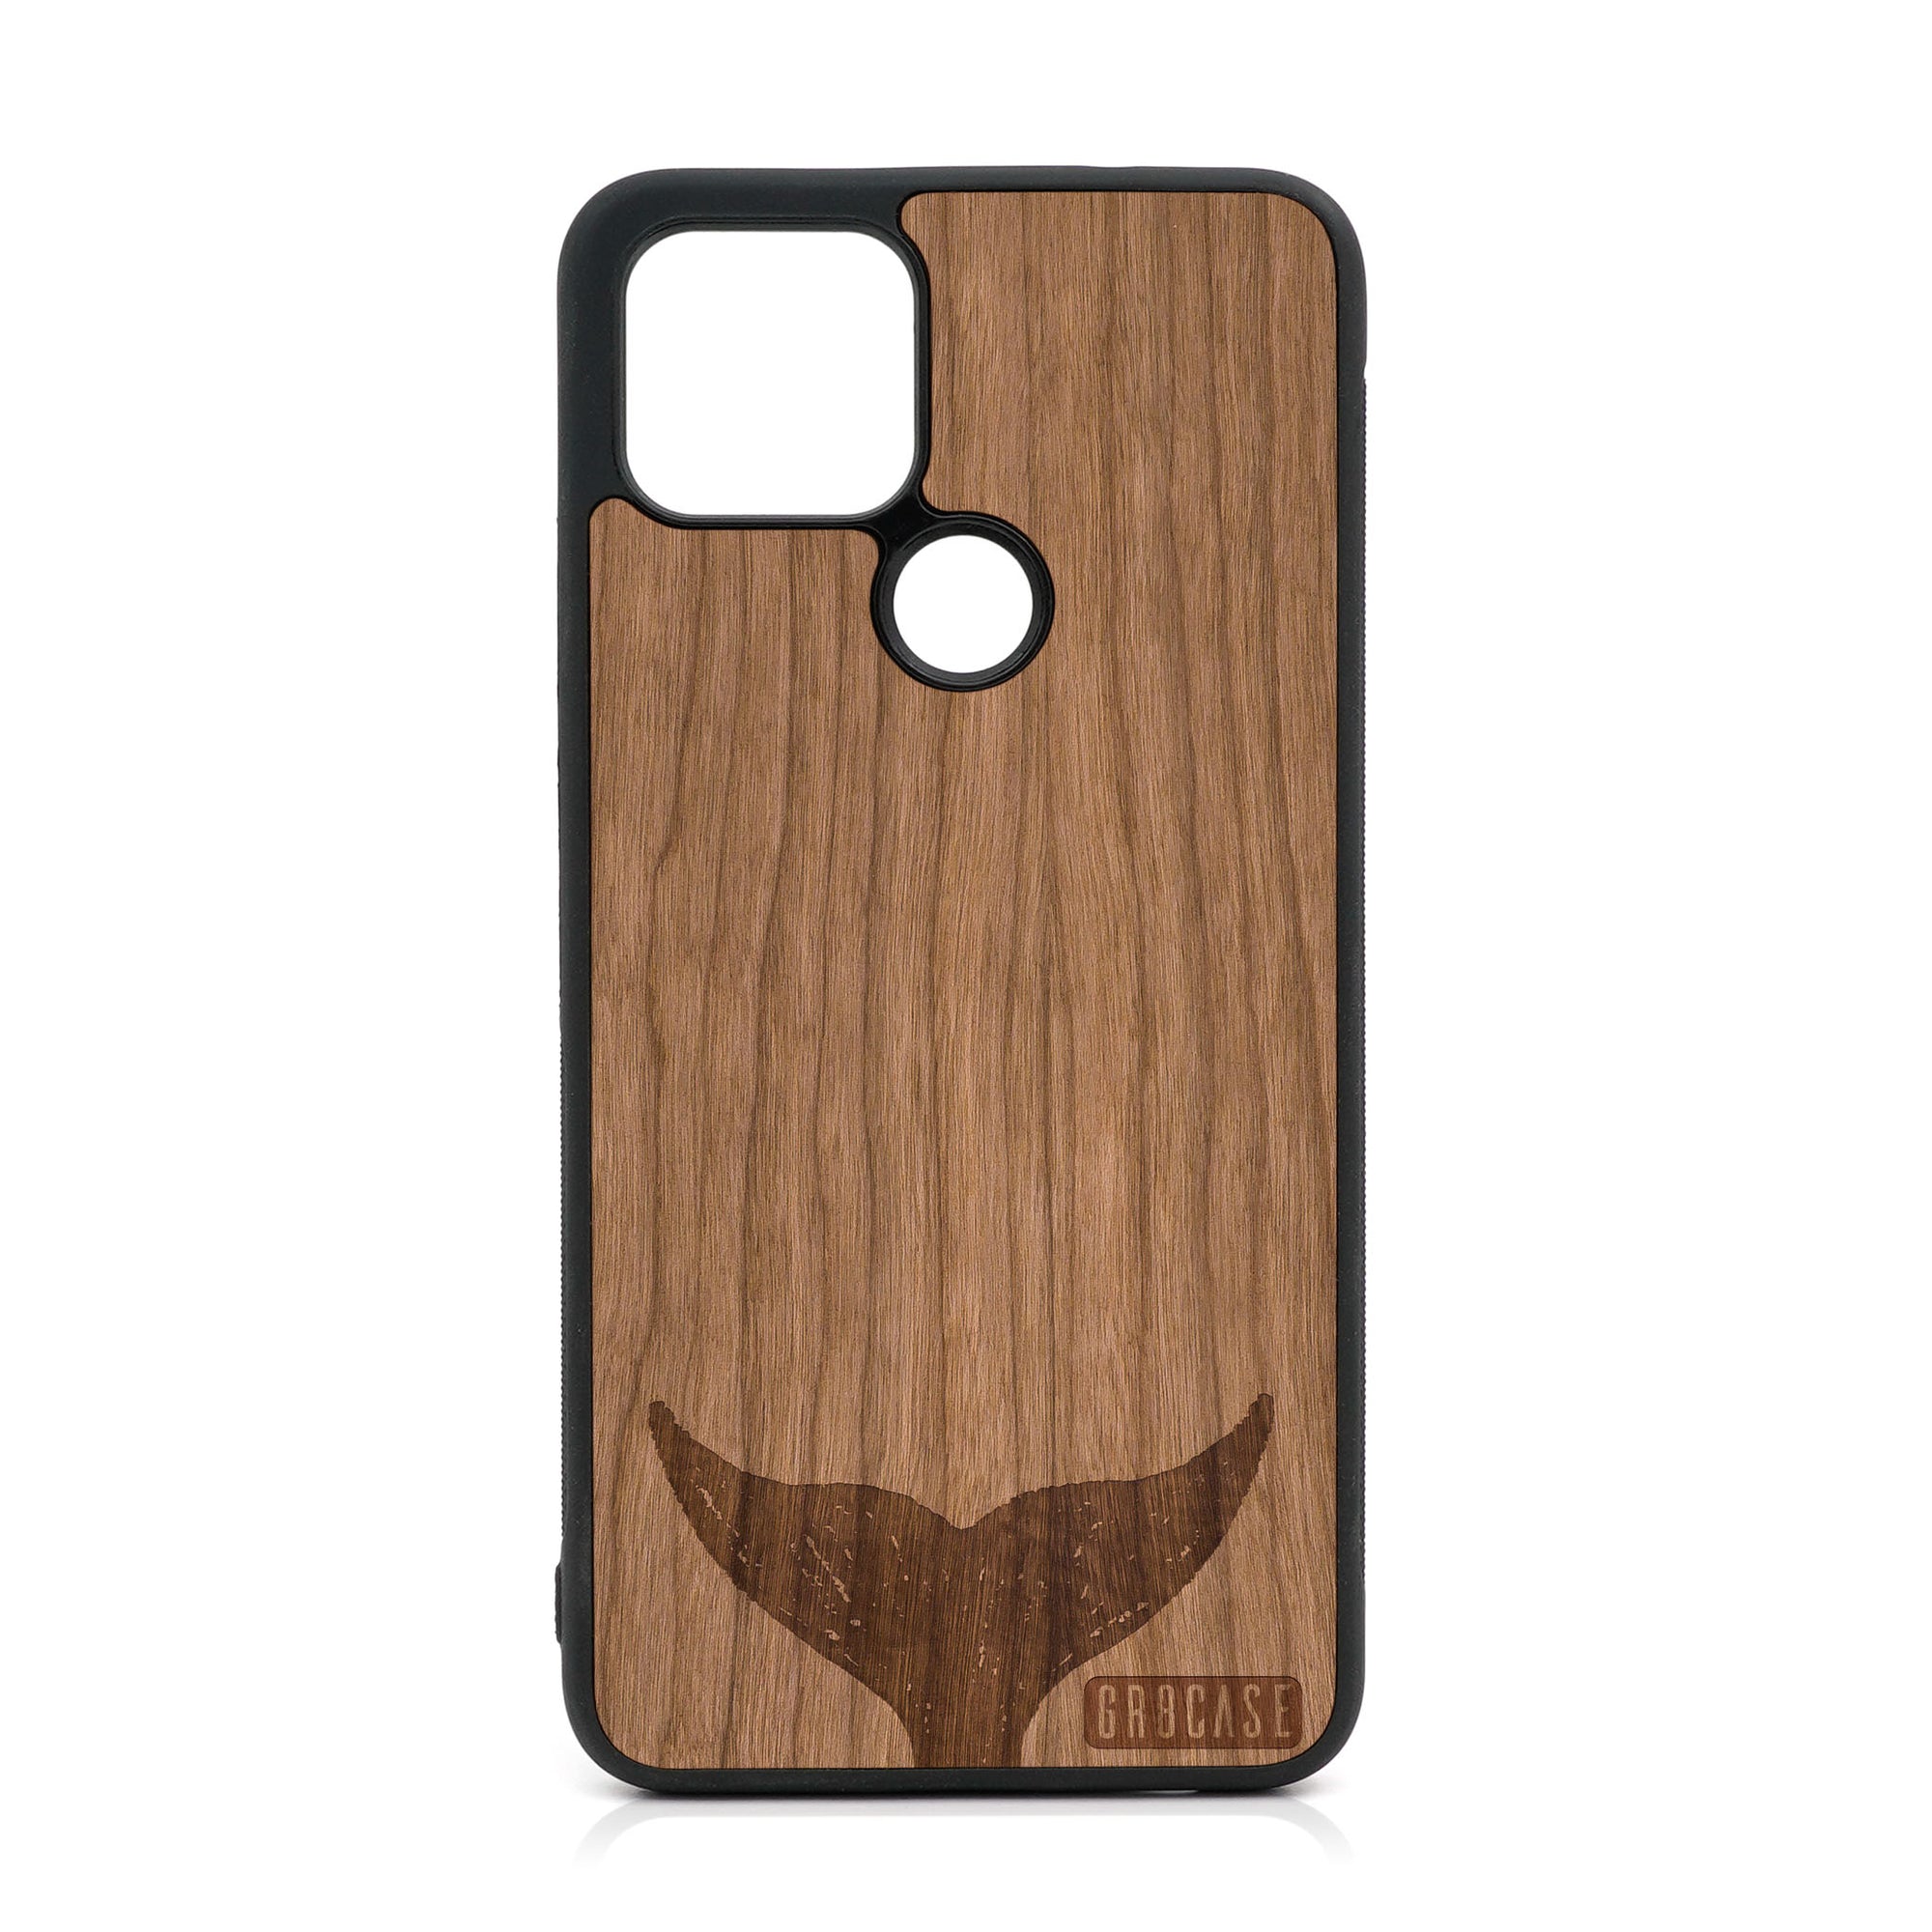 Whale Tail Design Wood Case For Google Pixel 5 XL/4A 5G